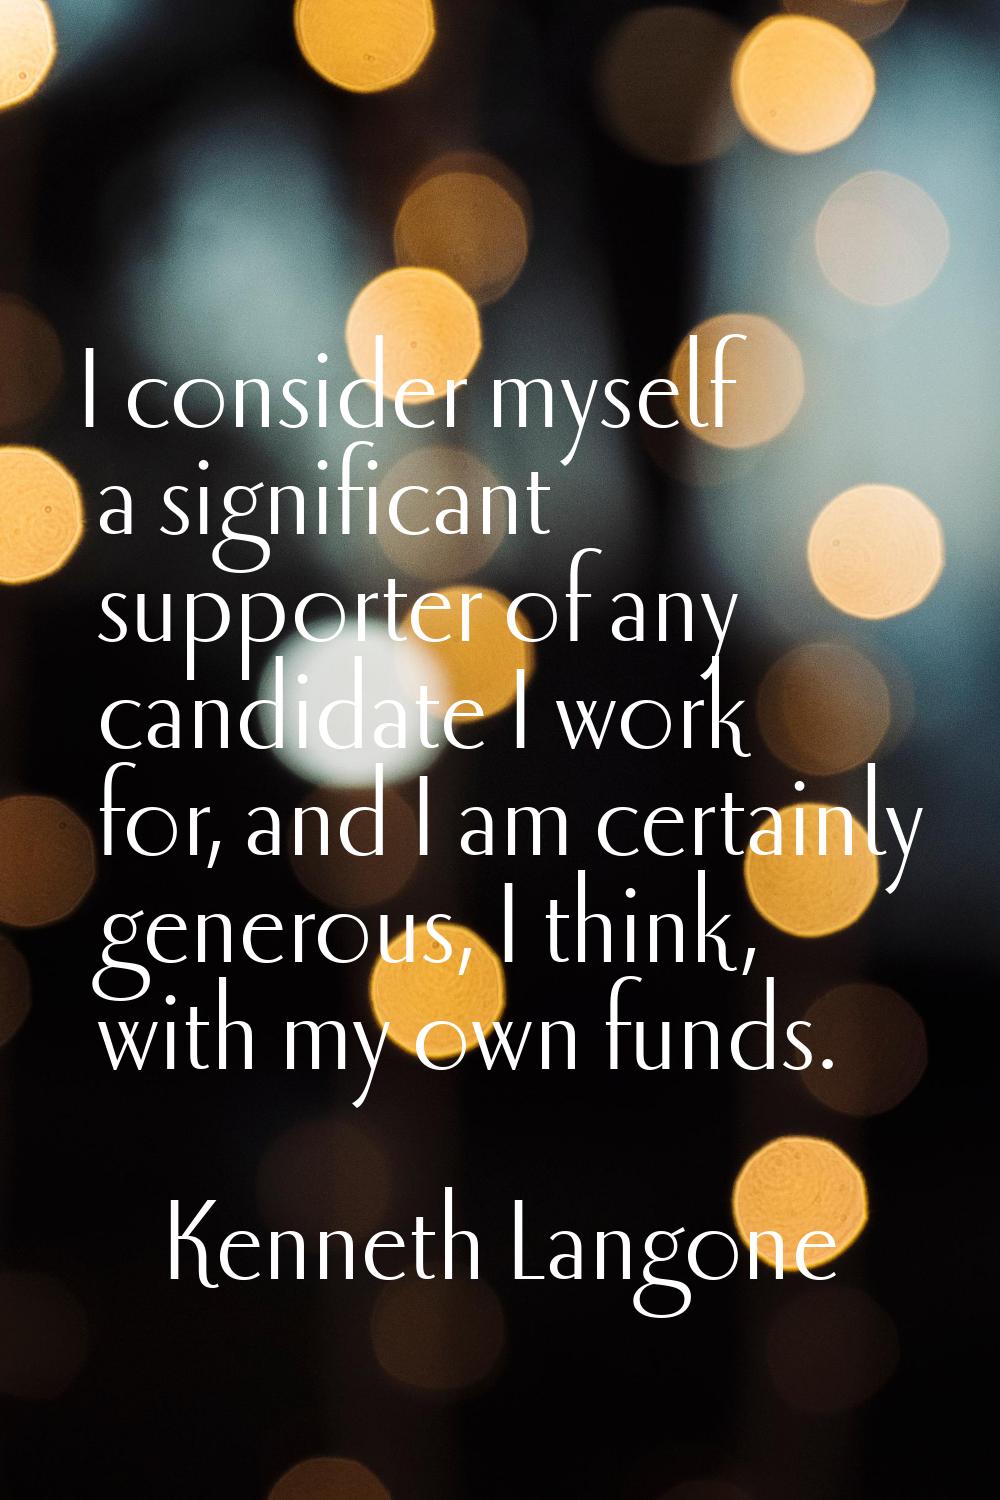 I consider myself a significant supporter of any candidate I work for, and I am certainly generous,